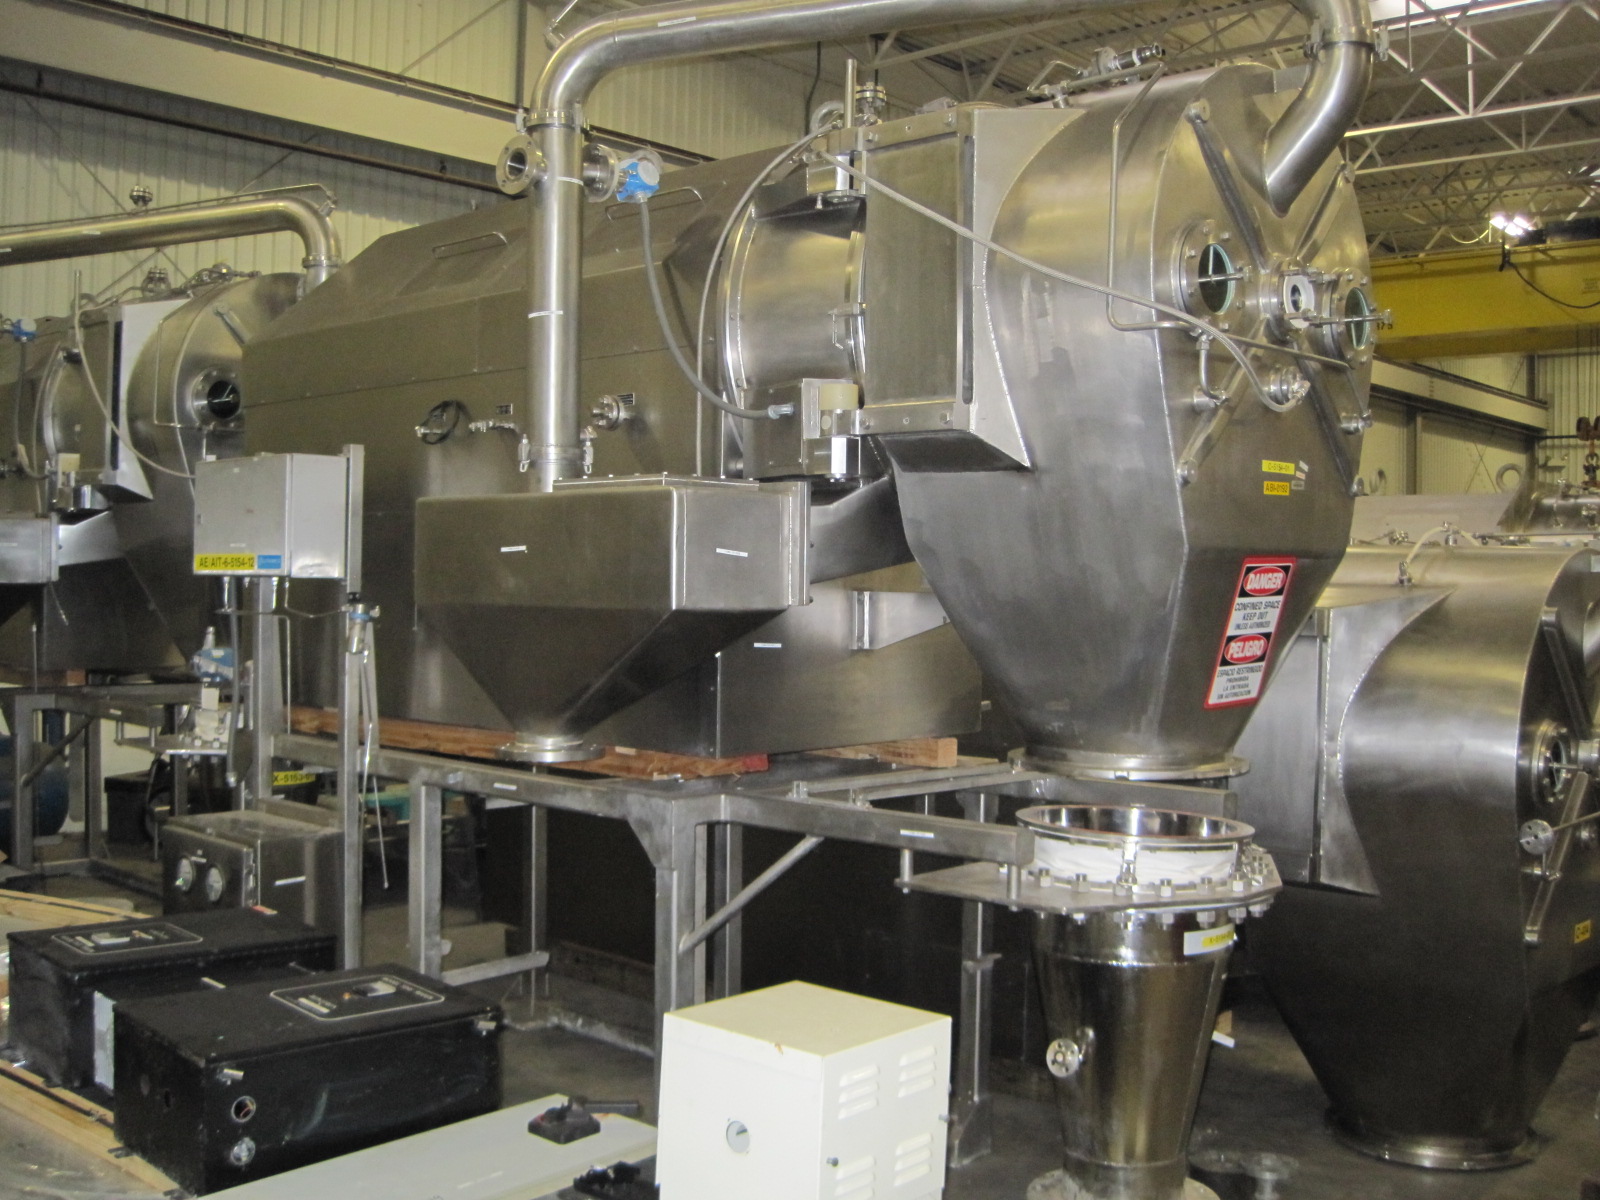 ***SOLD***HEINKEL Model HF800.1 Pharmaceutical Grade Inverting Filter Centrifuge.  Contact Parts are (1.4571) 316/Ti Stainless Steel. Inner Bowl Dia. 800mm. Capacity 149KG/119L. 1600 RPM Max Drum Speed. G-Force 1138 G's.  All Electrical unit Complete with Controls.
UNIT IS FACTORY REFURBISHED AND OFFERED WITH 1 YEAR MECHANICAL WARRANTY